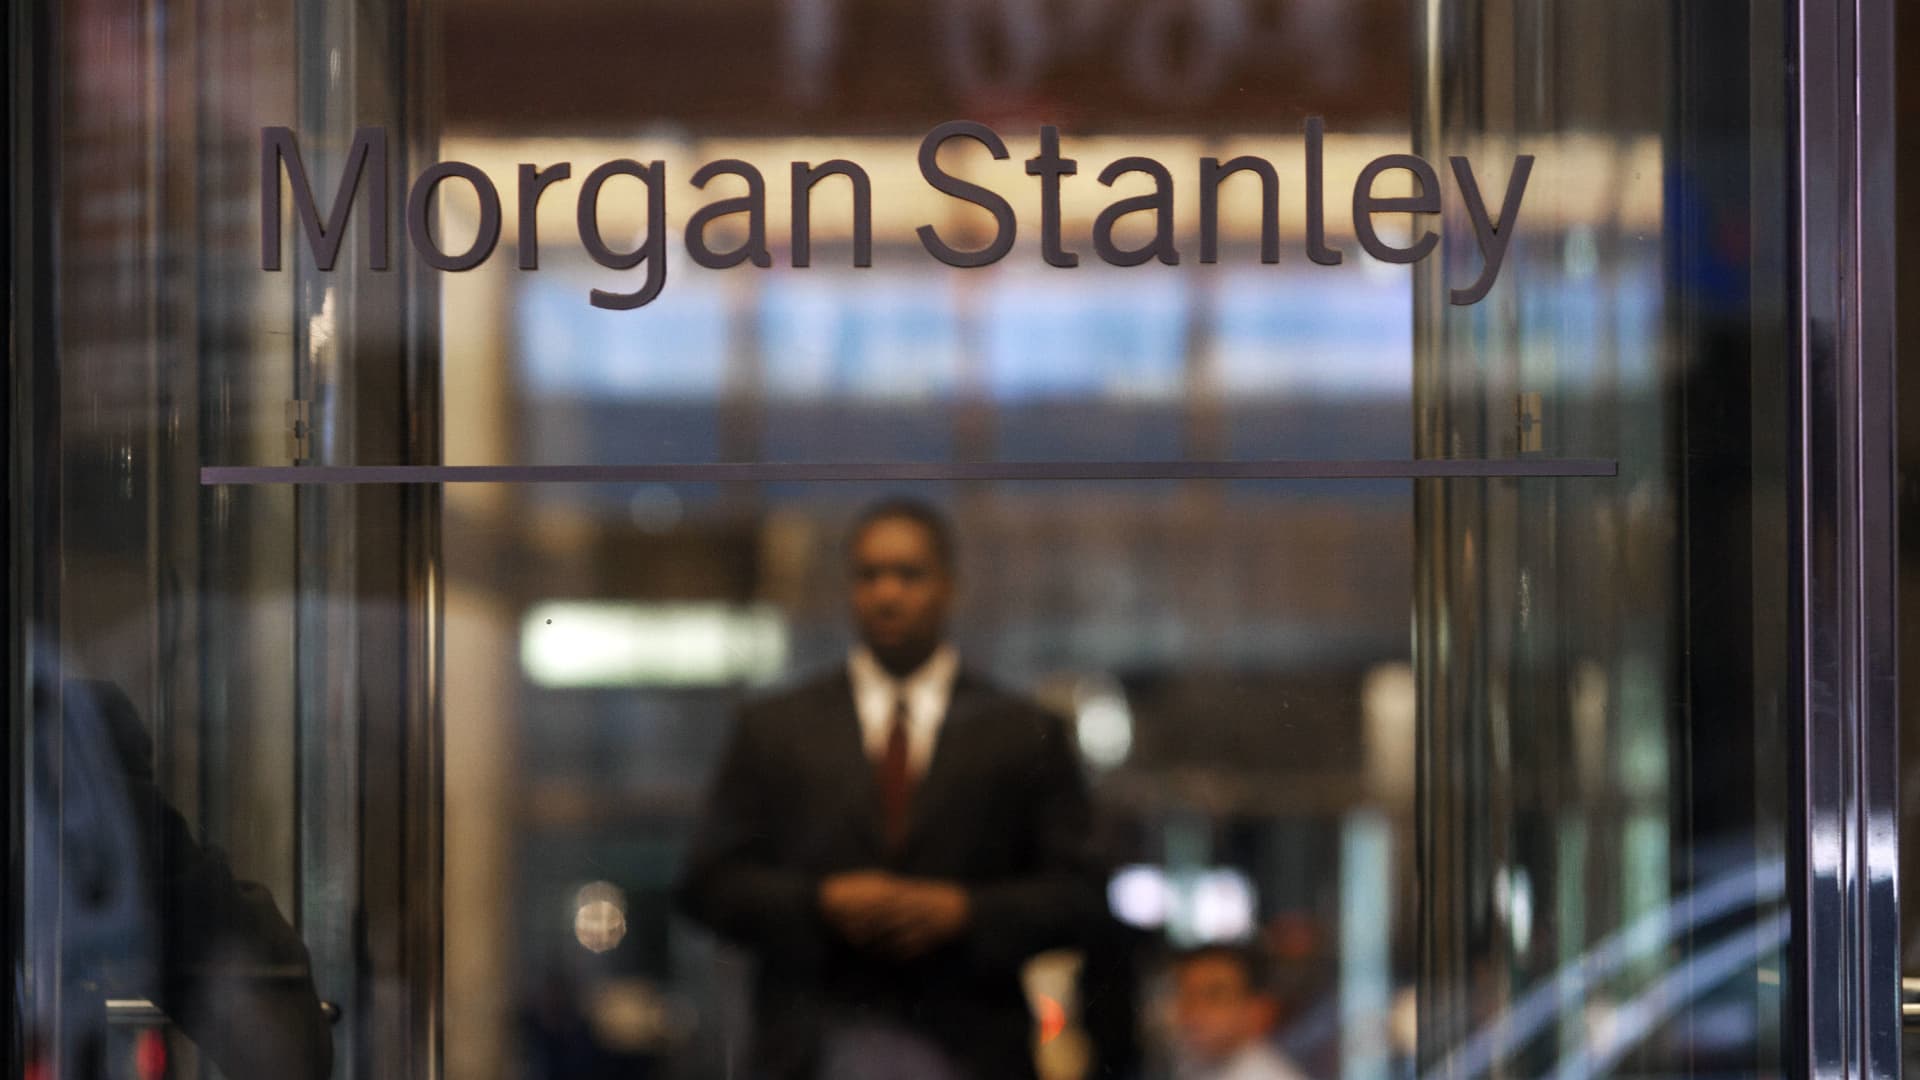 Morgan Stanley says these global stocks are set for earnings beats — and gives one over 45% upside